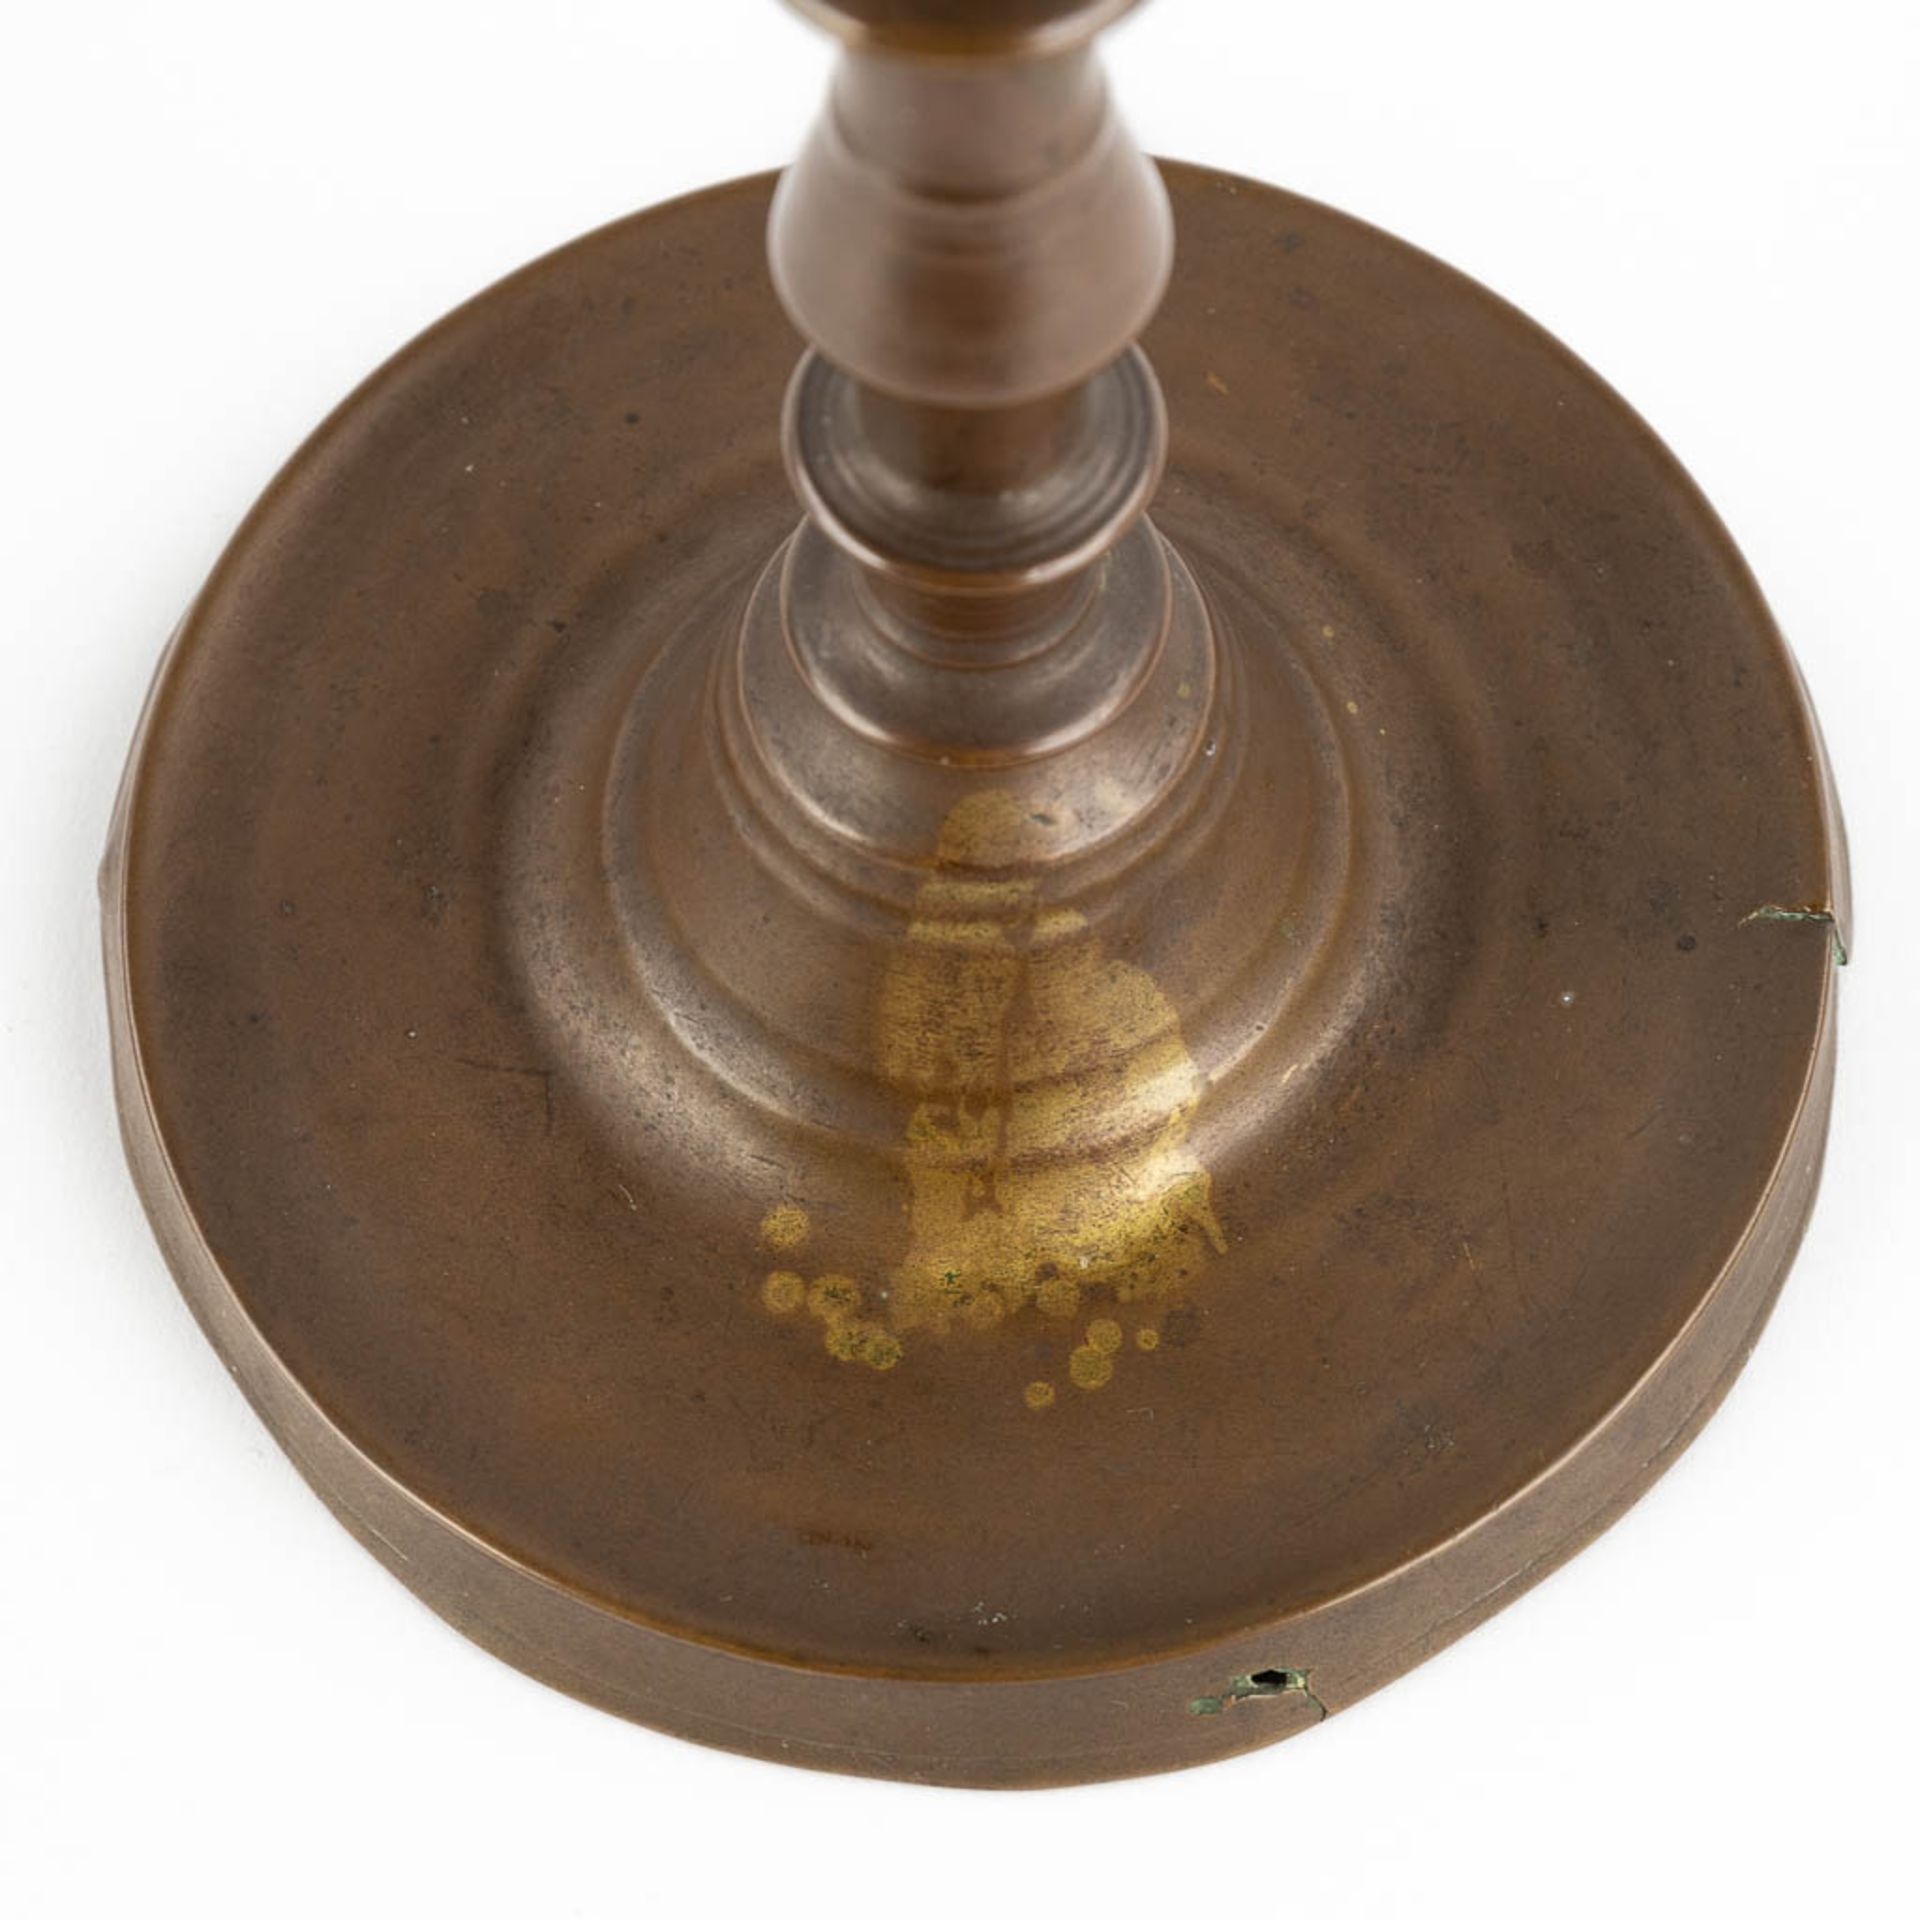 An antique candlestick, Flanders or The Netherlands, 16th C. (H:24,5 x D:14,5 cm) - Image 9 of 11